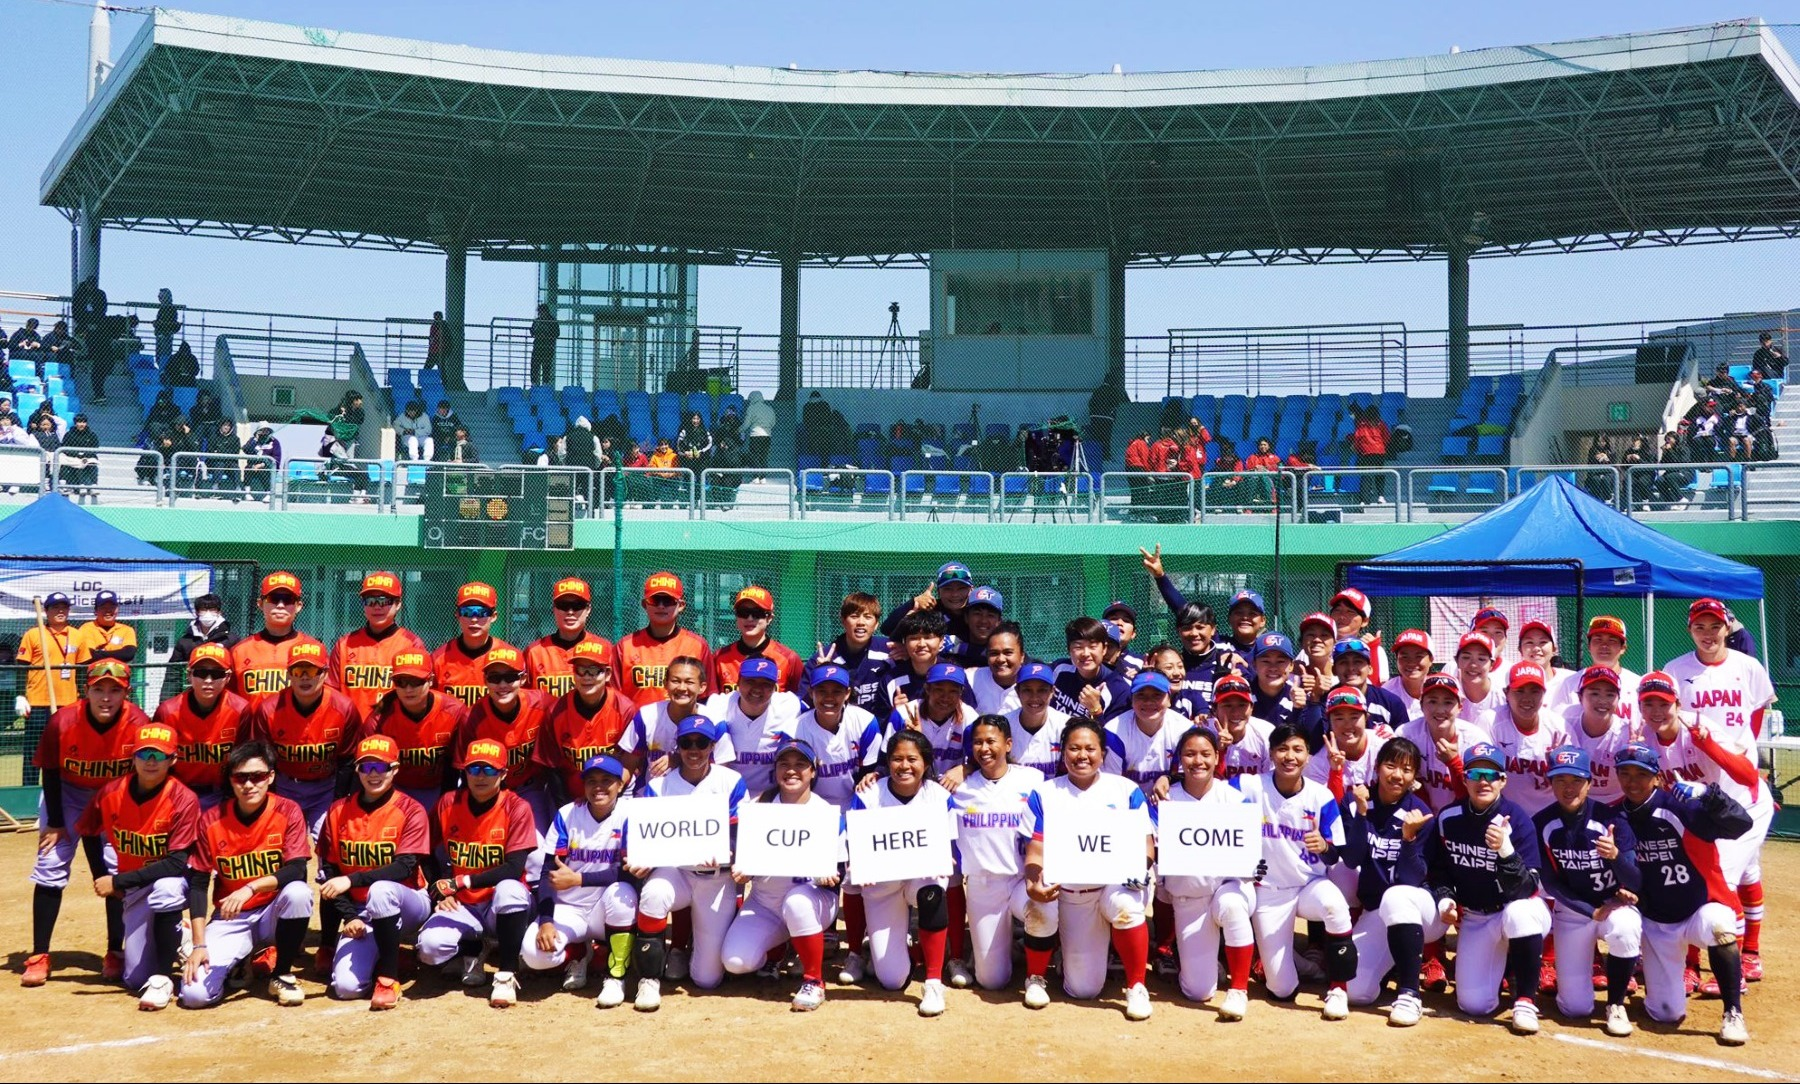 The top four teams at the Women's Softball Asian Cup in Incheon all qualified for the Women's Softball World Cup ©WBSC